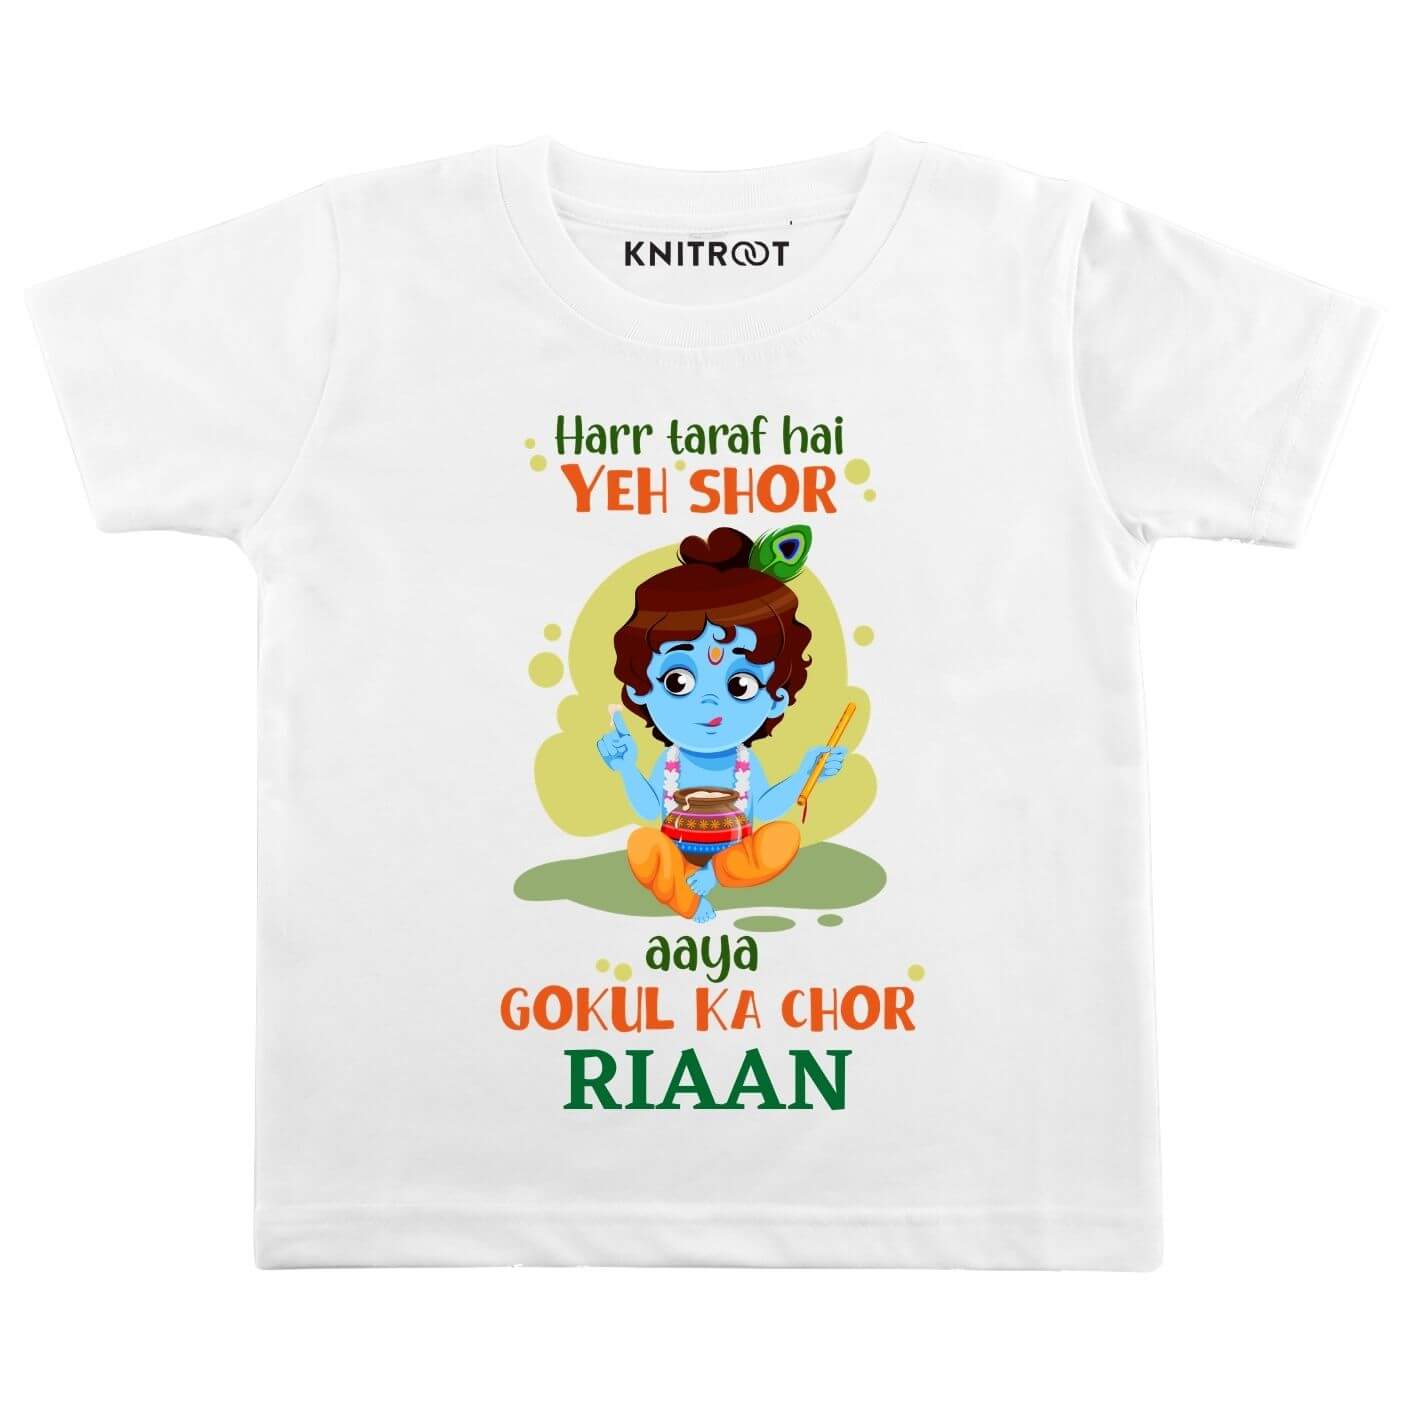 BLU VAPOUR Krishna Dress Little Baby Kanha Dress For Kids Boys Girls  Janmashtami Set Of 11 Items Includes Pagri,(3-6 Months, Blue) : Amazon.in:  Clothing & Accessories